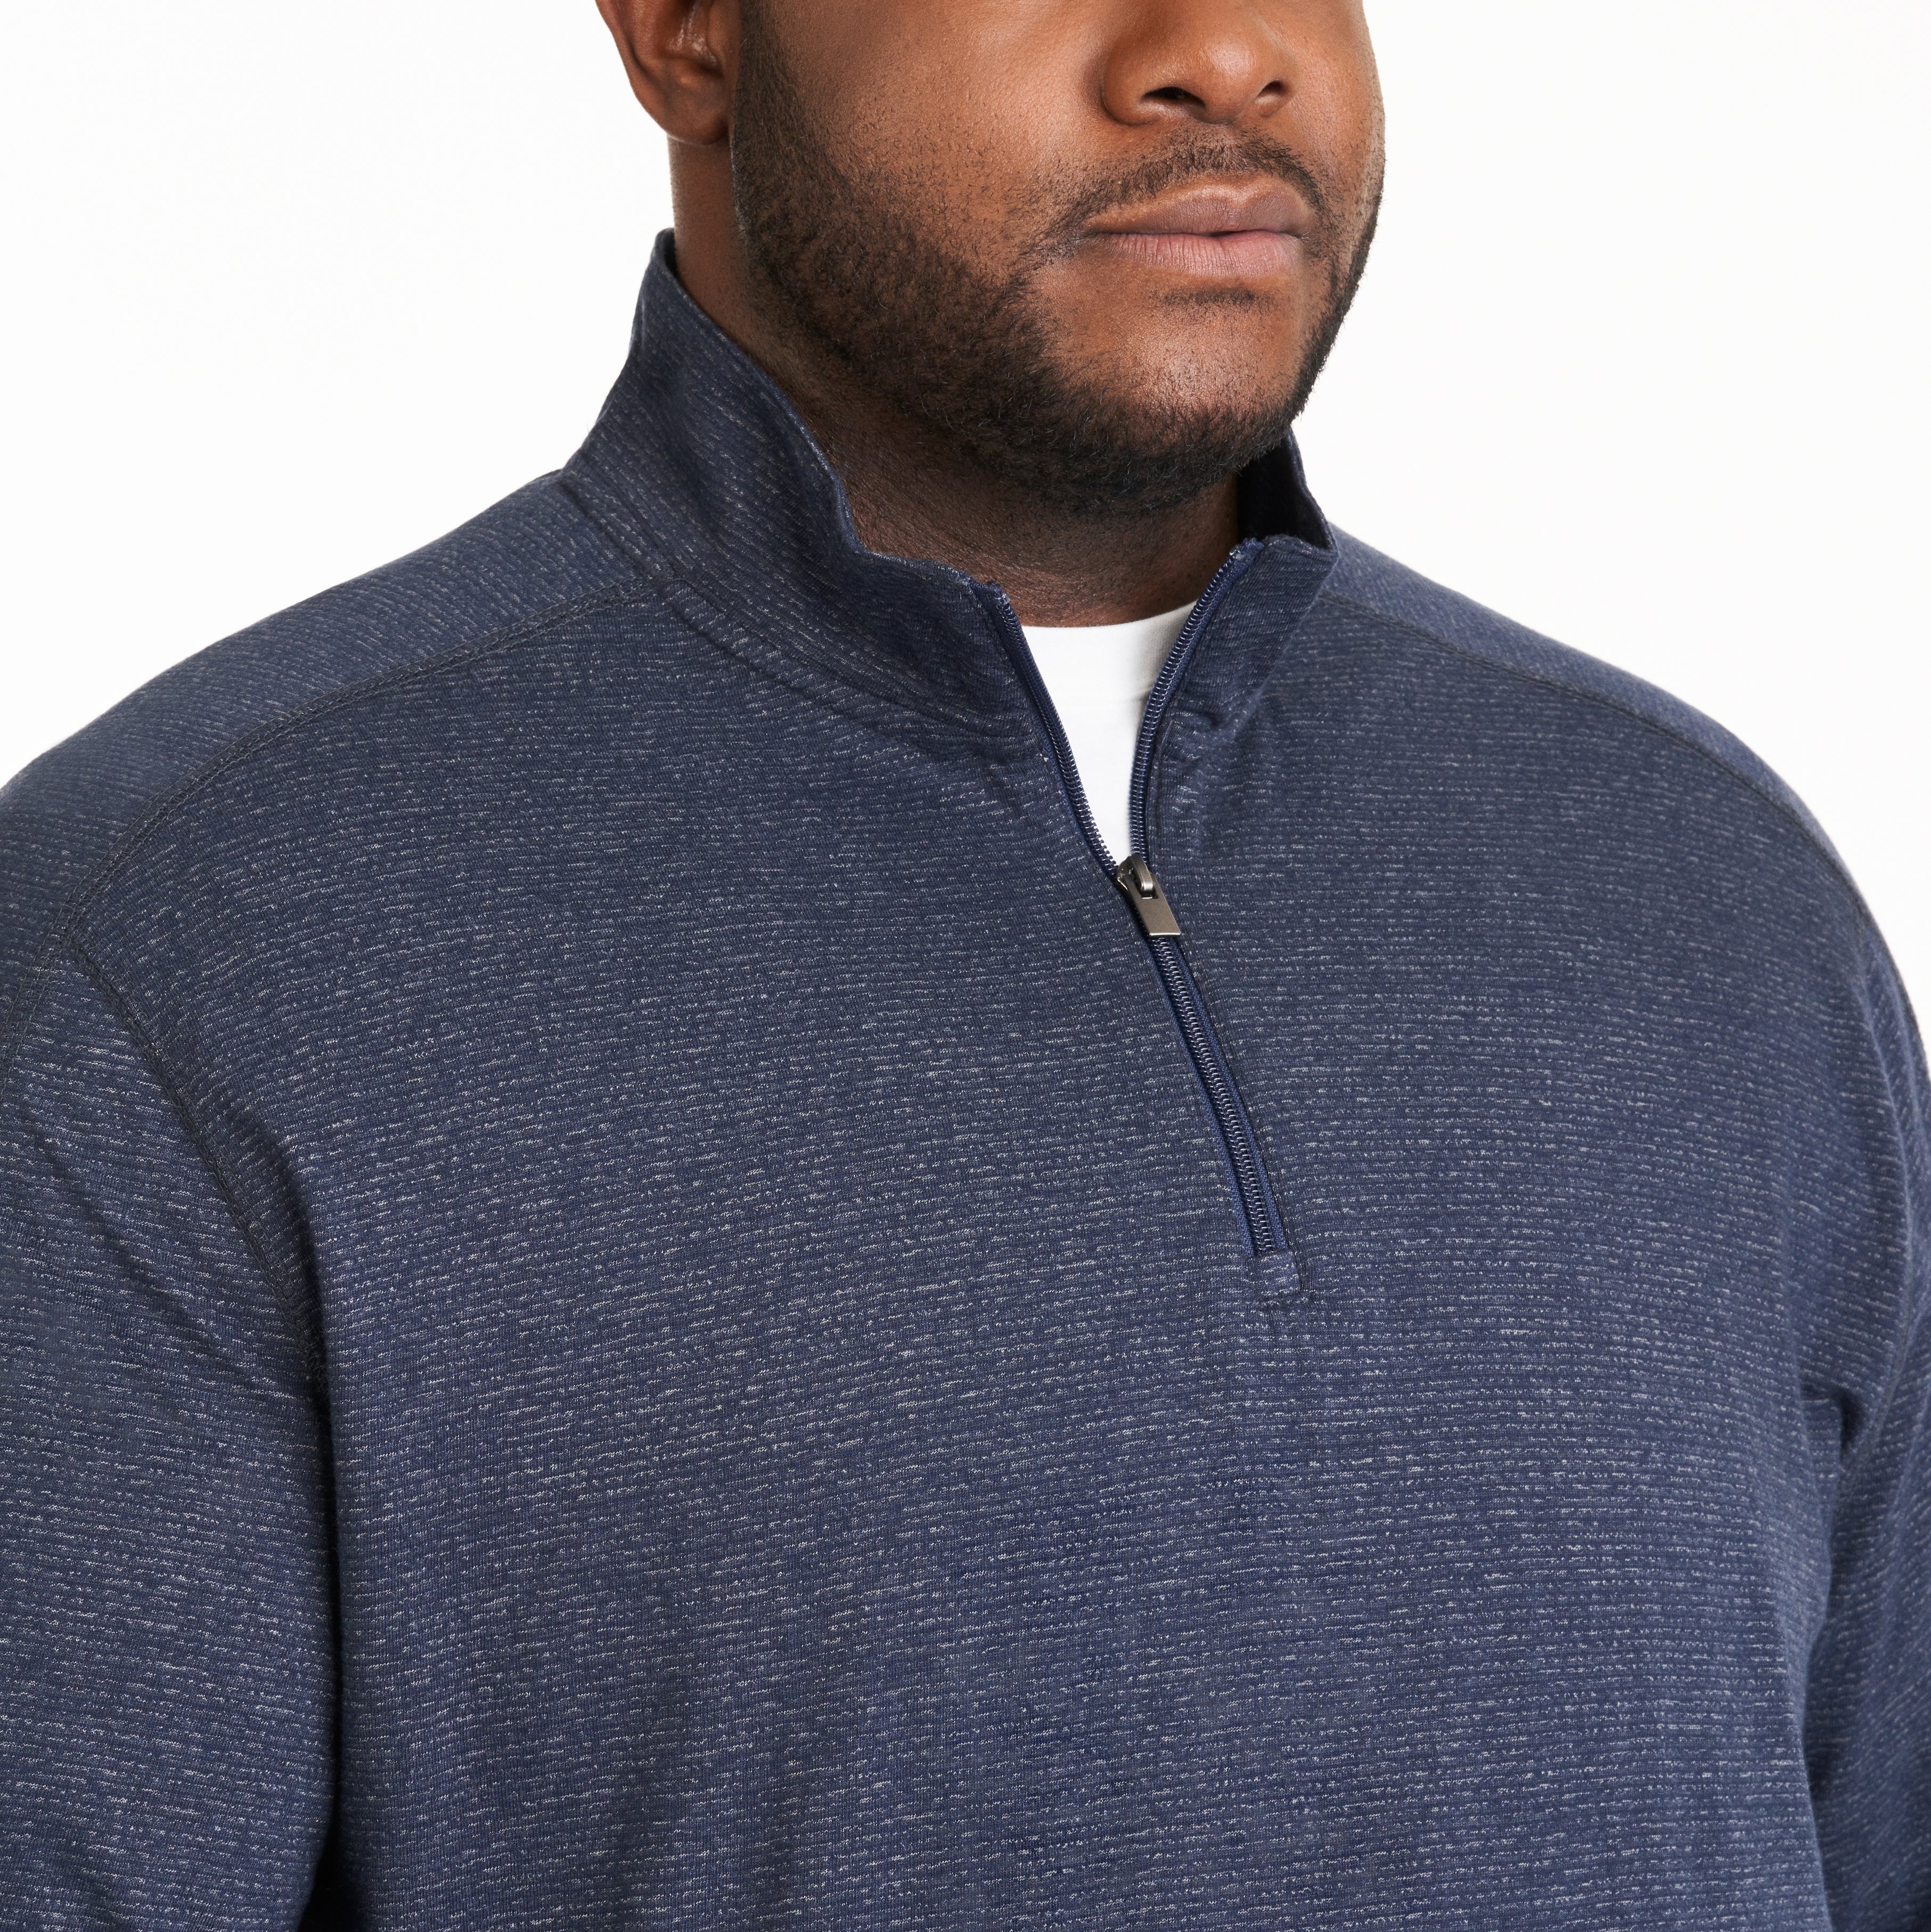 Essential Two-Tone Quarter Zip Pullover - Big & Tall